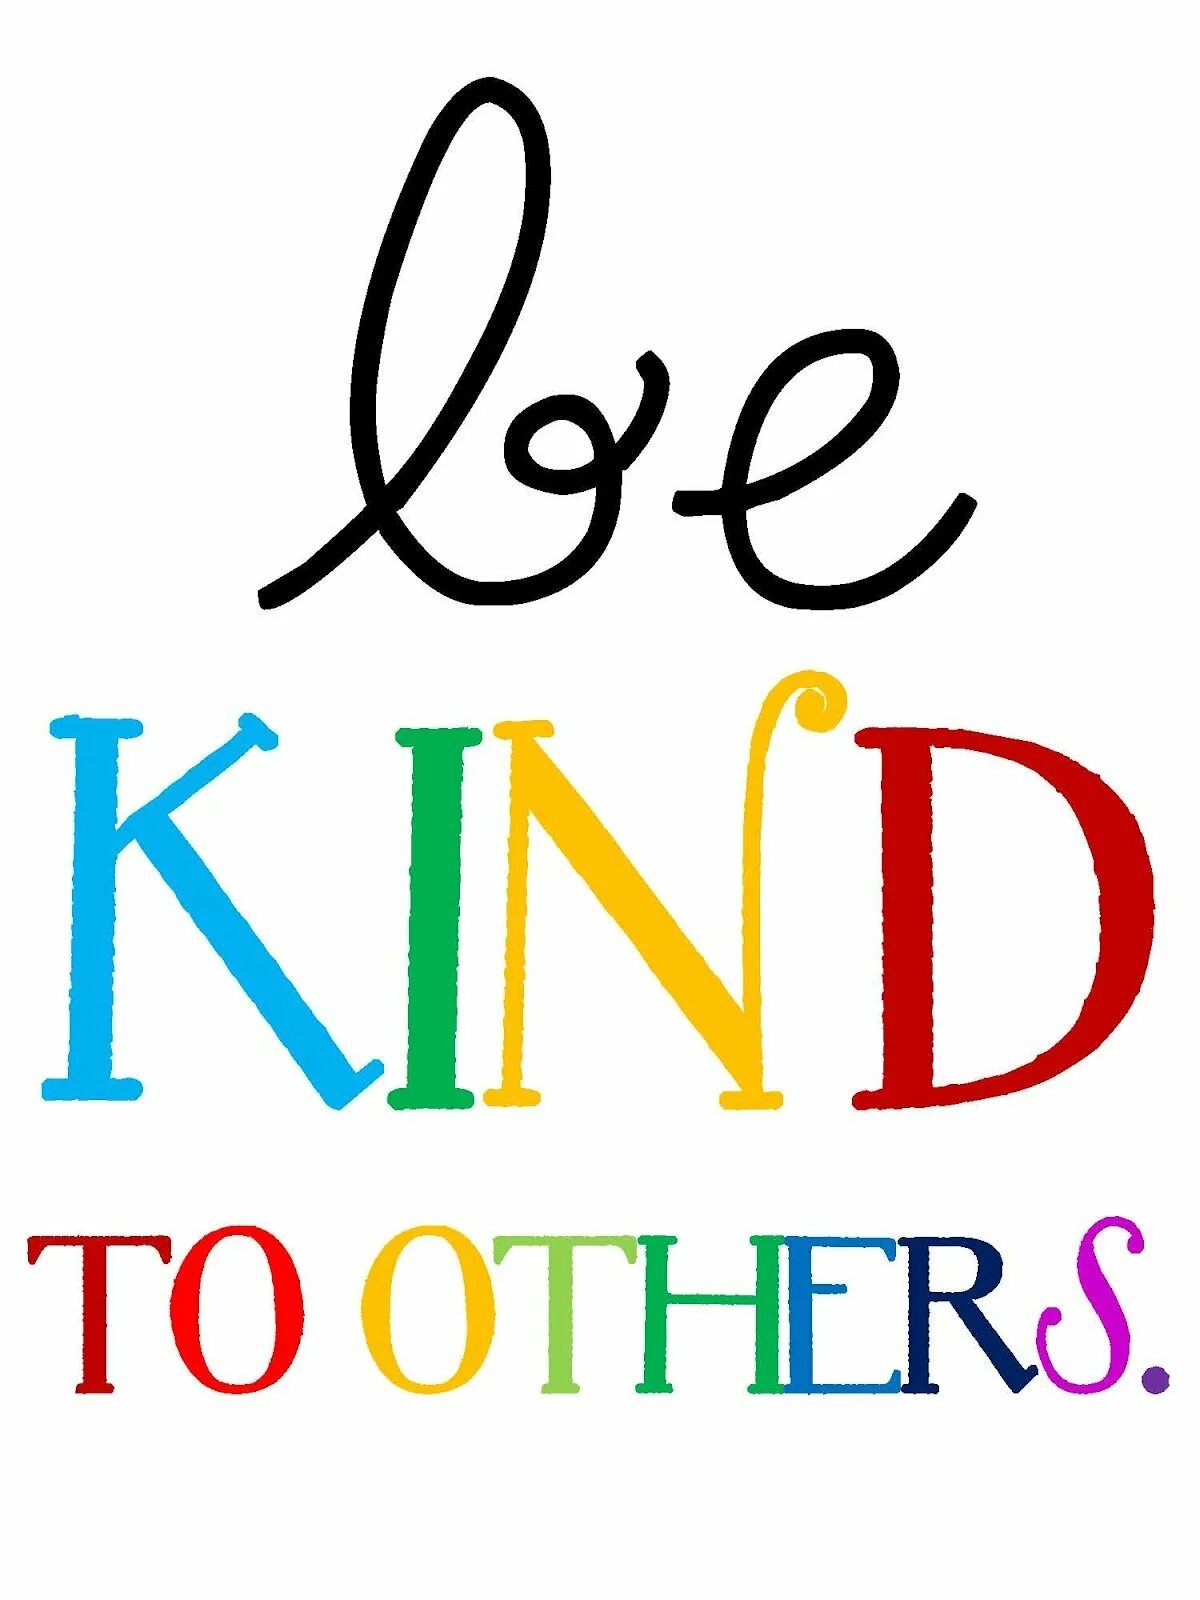 Be kind. Надпись Kindness. Be kind реклама. Be kind to others. Be kind together